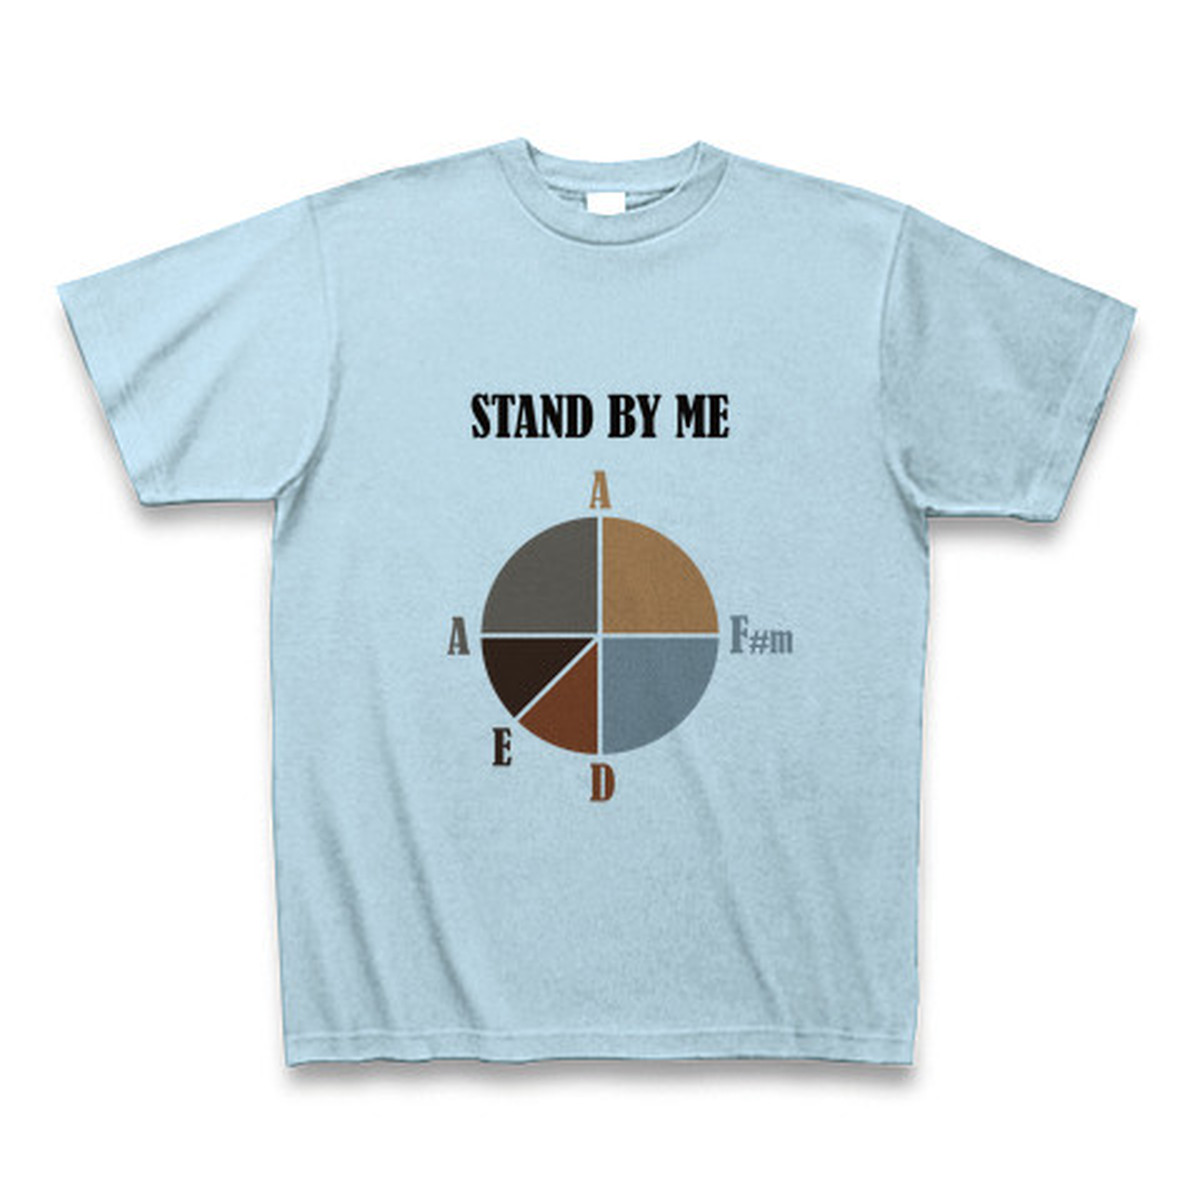 STAND BY ME（スタンド・バイ・ミー）コード進行Tシャツ ...